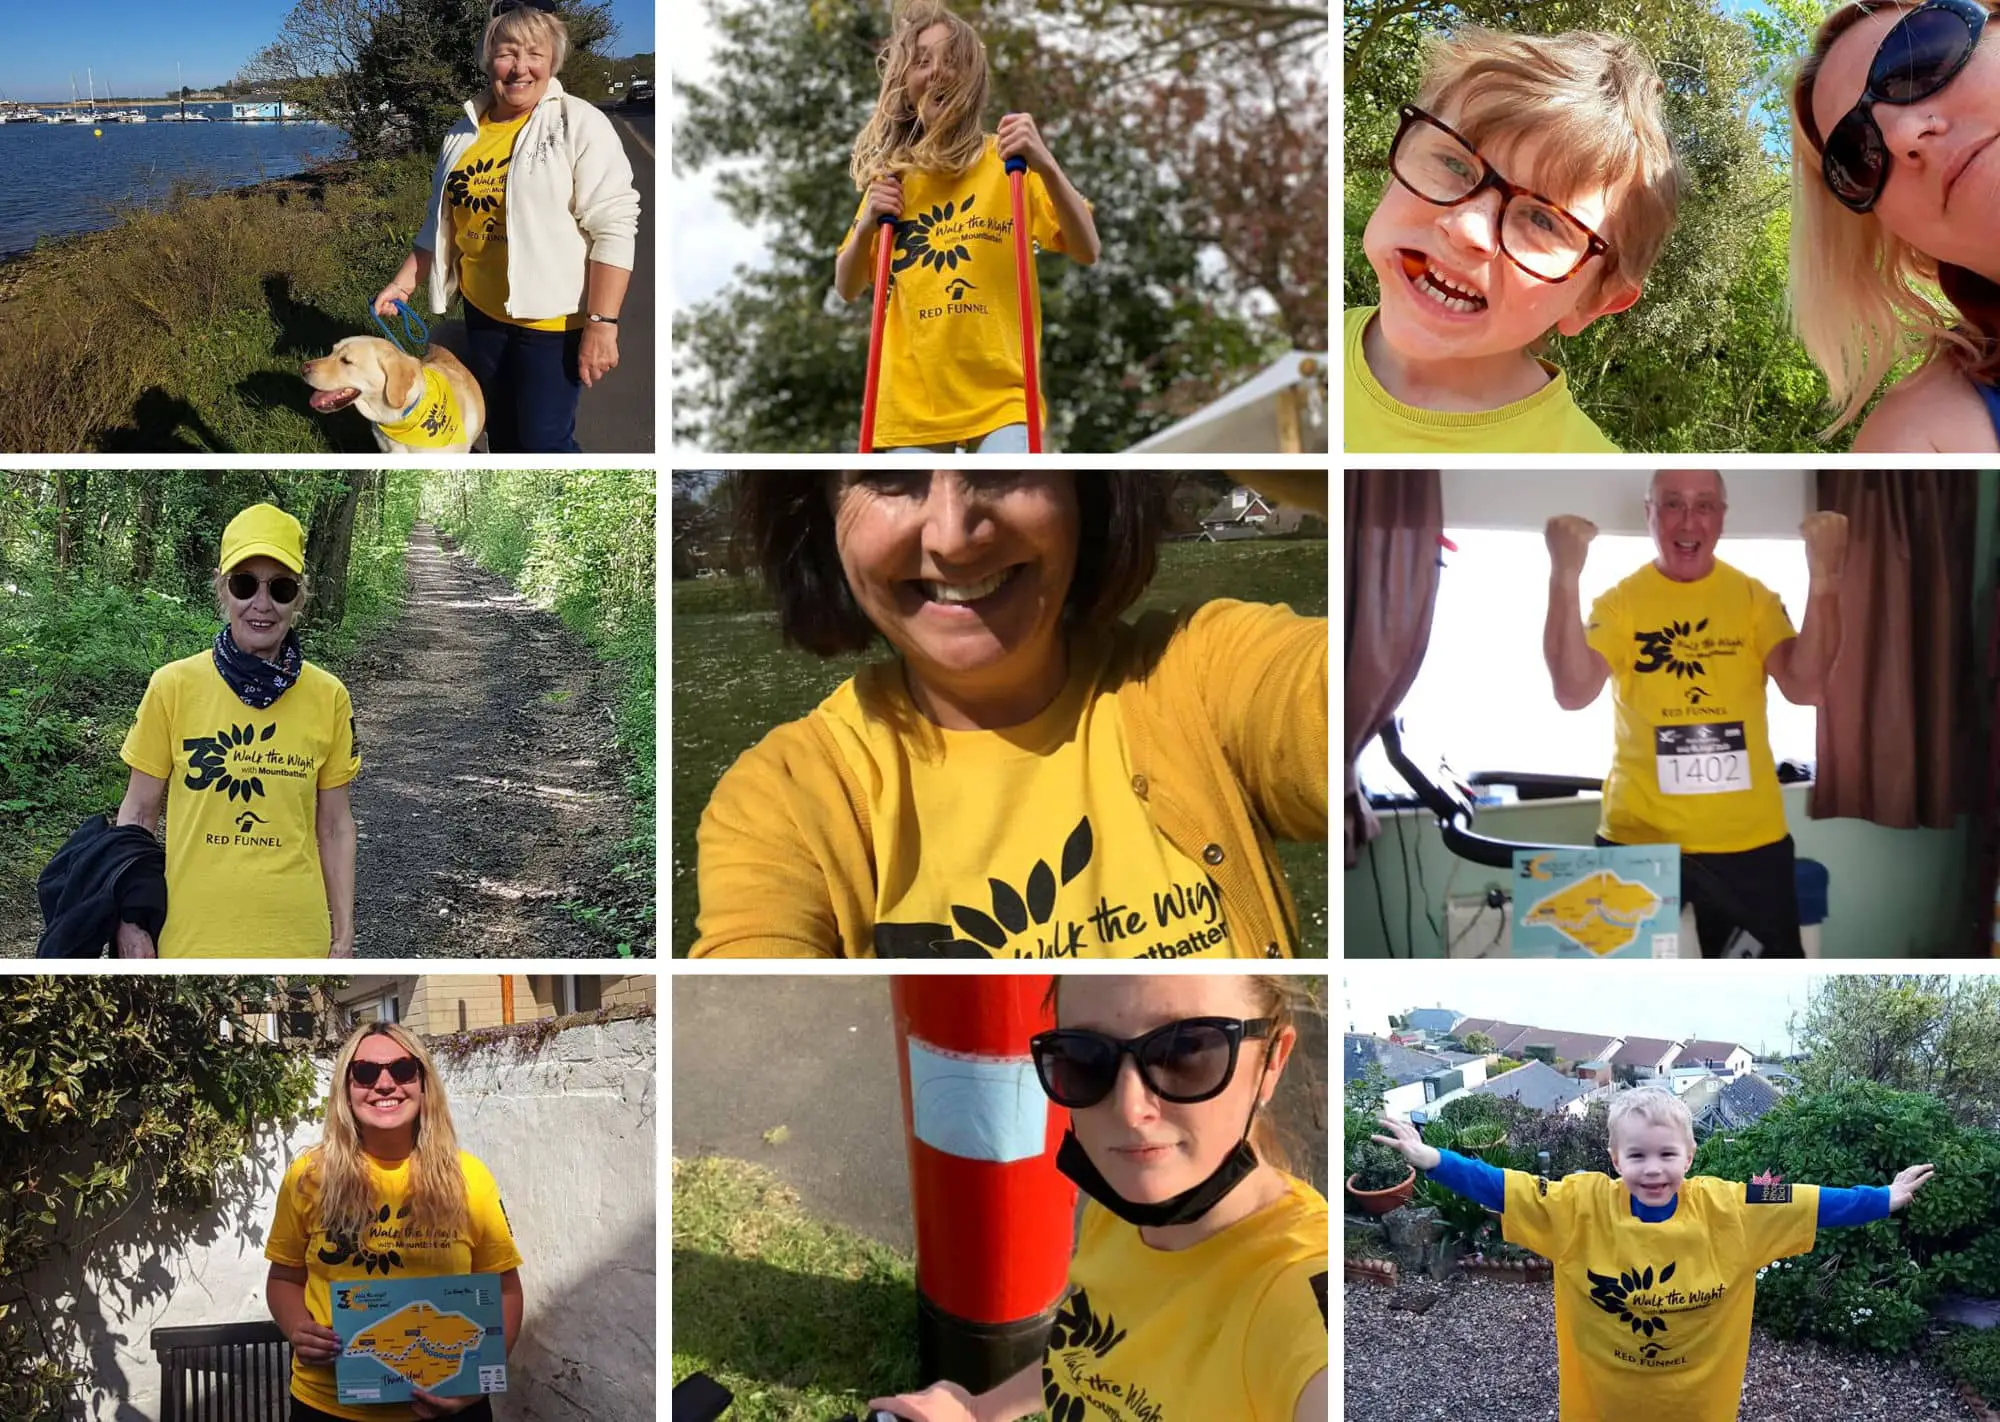 Montage of Walk the Wight your Way participants